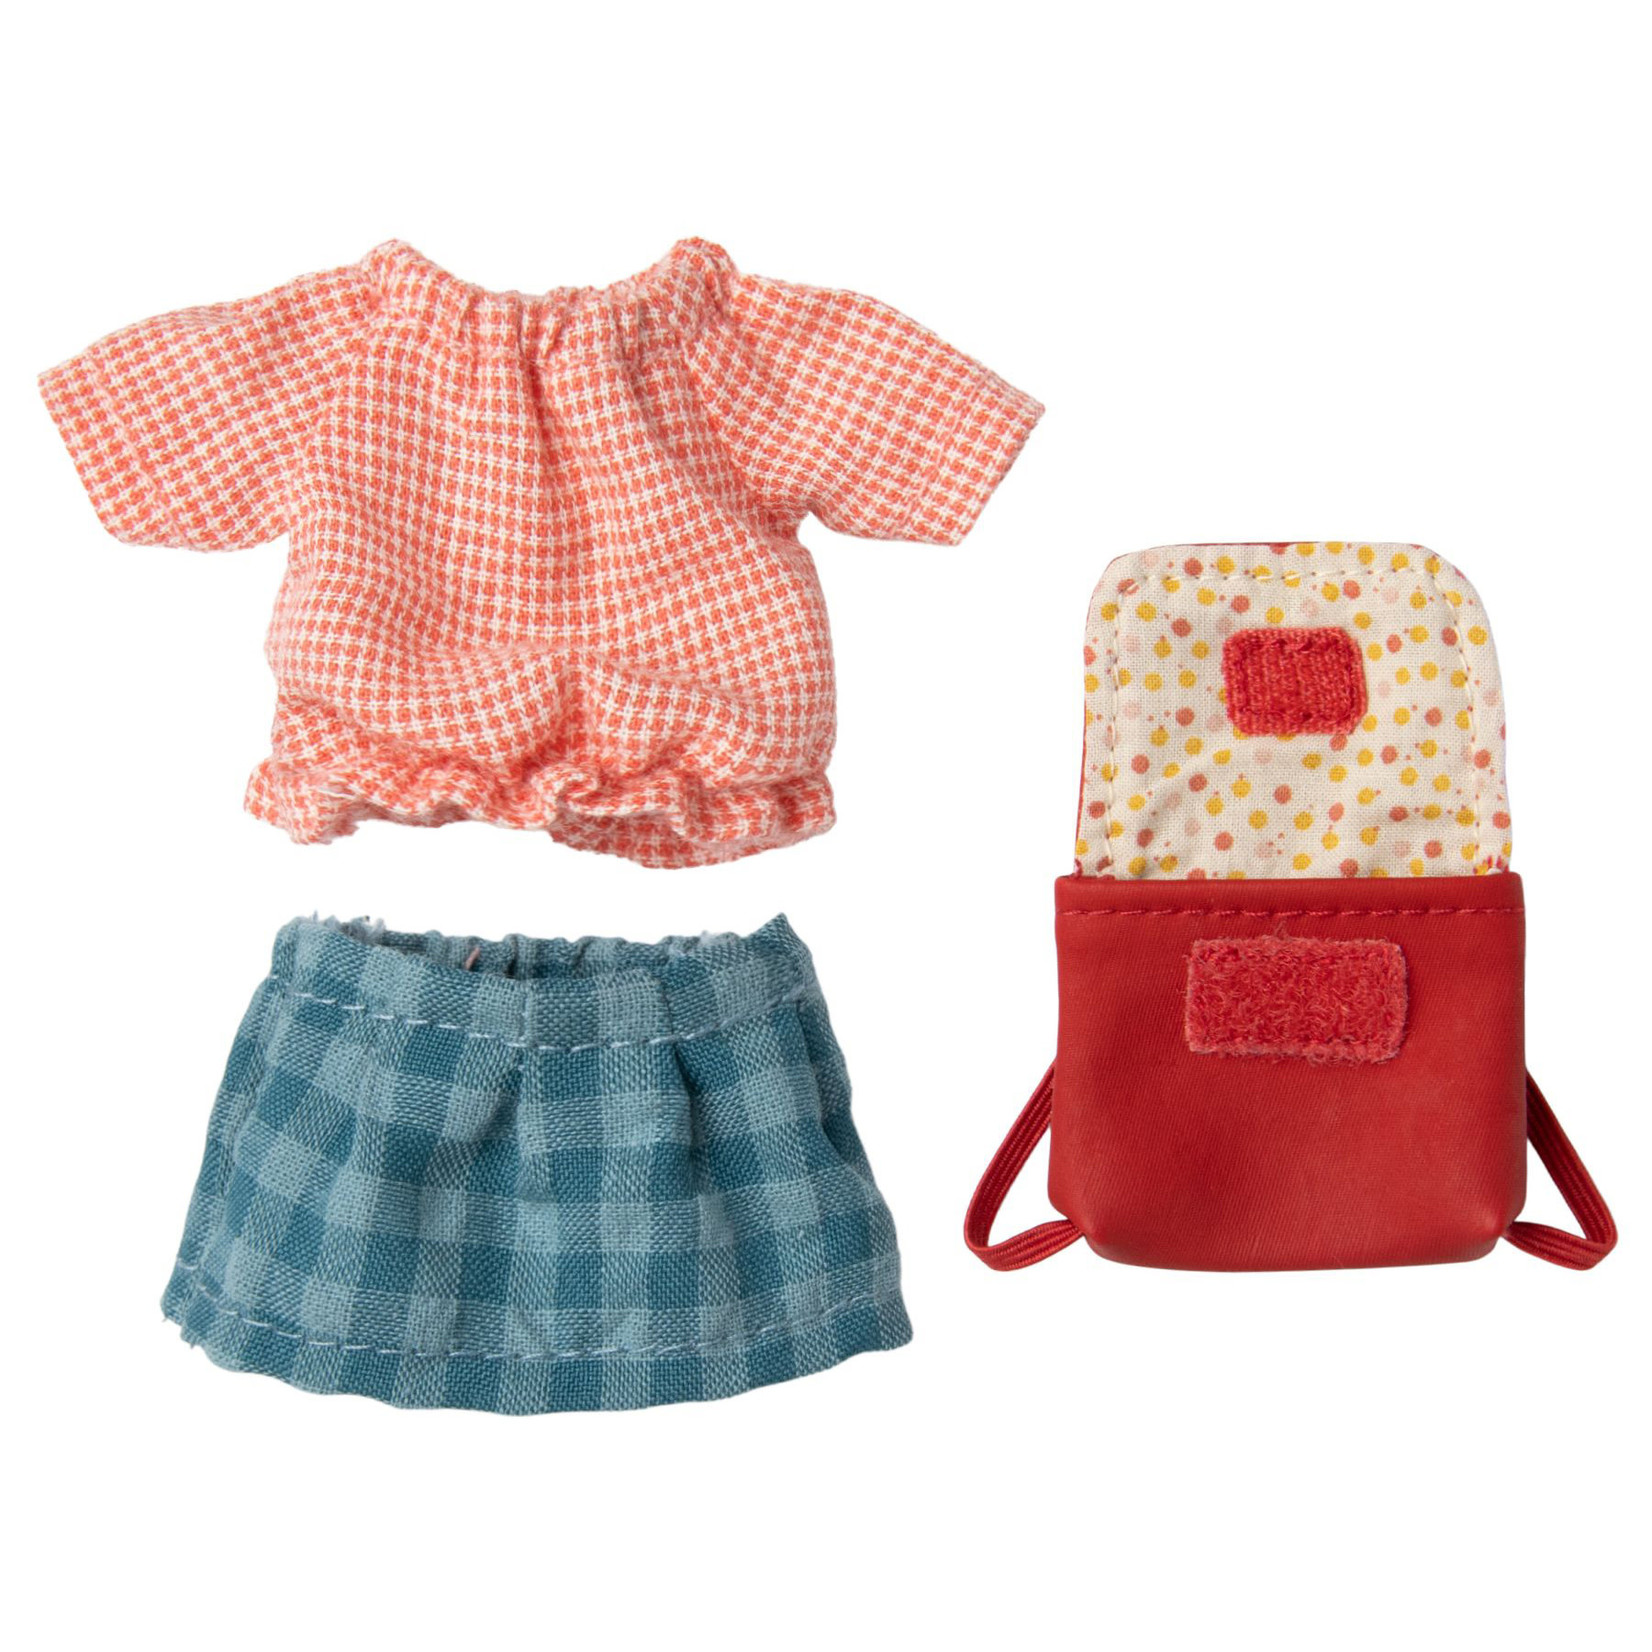 Maileg Maileg CLOTHES and Red bag Big sister mouse